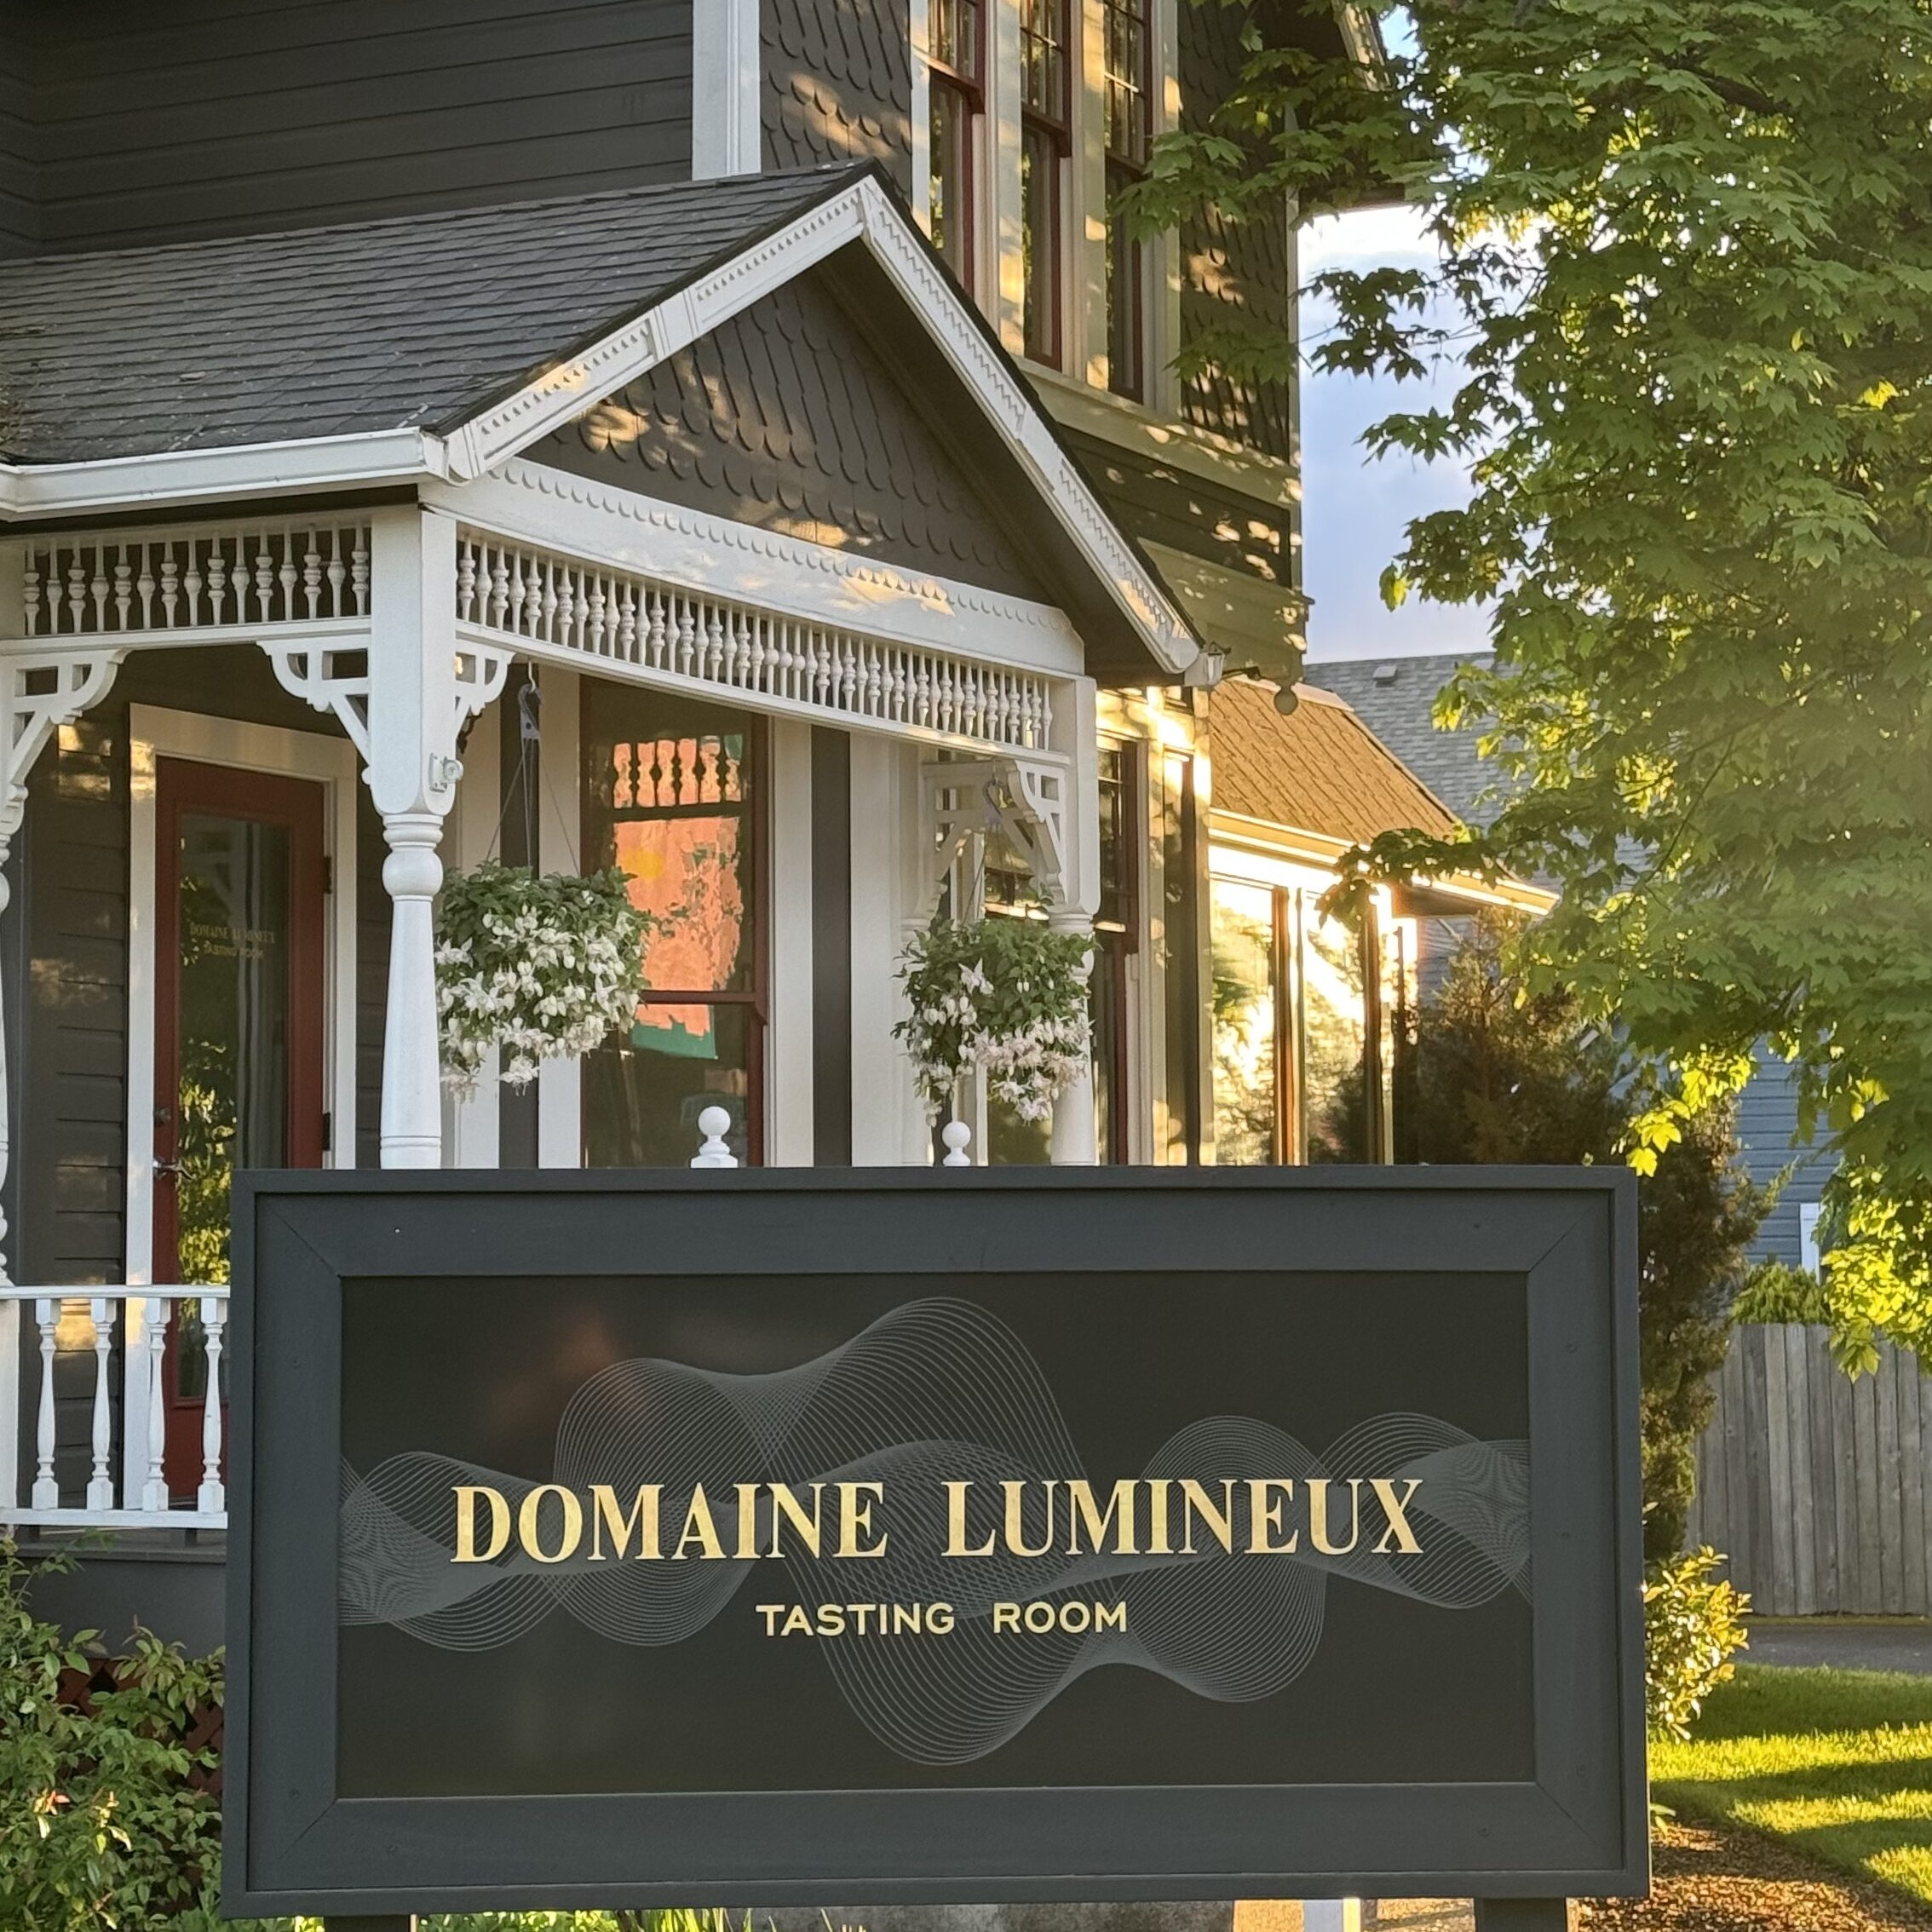 The exterior of the Domaine Lumineux tasting room. 